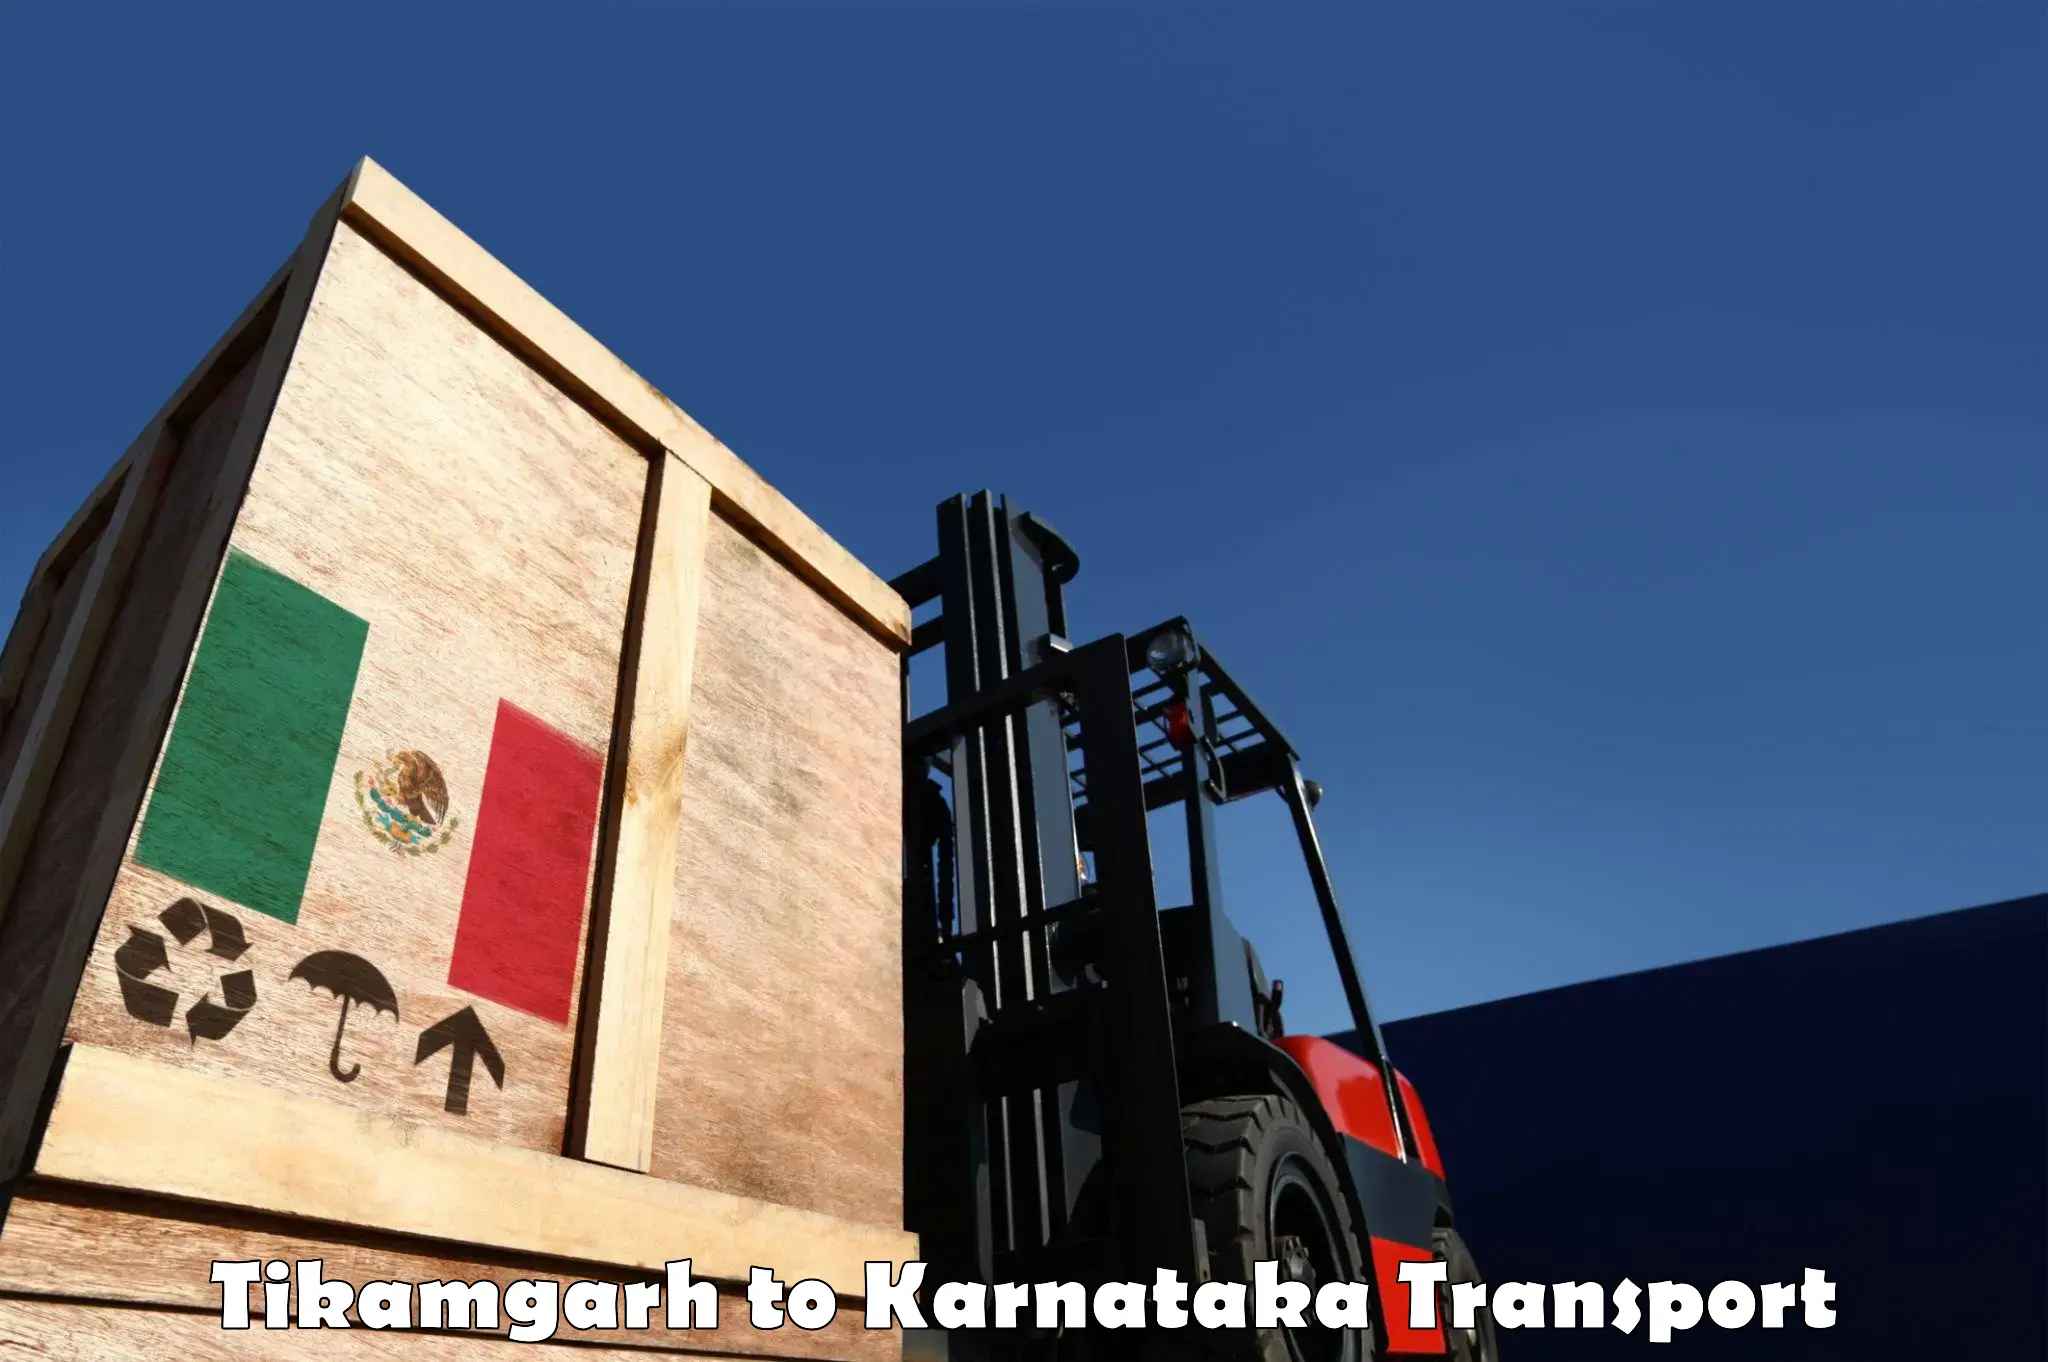 Air freight transport services in Tikamgarh to Ramanathapura